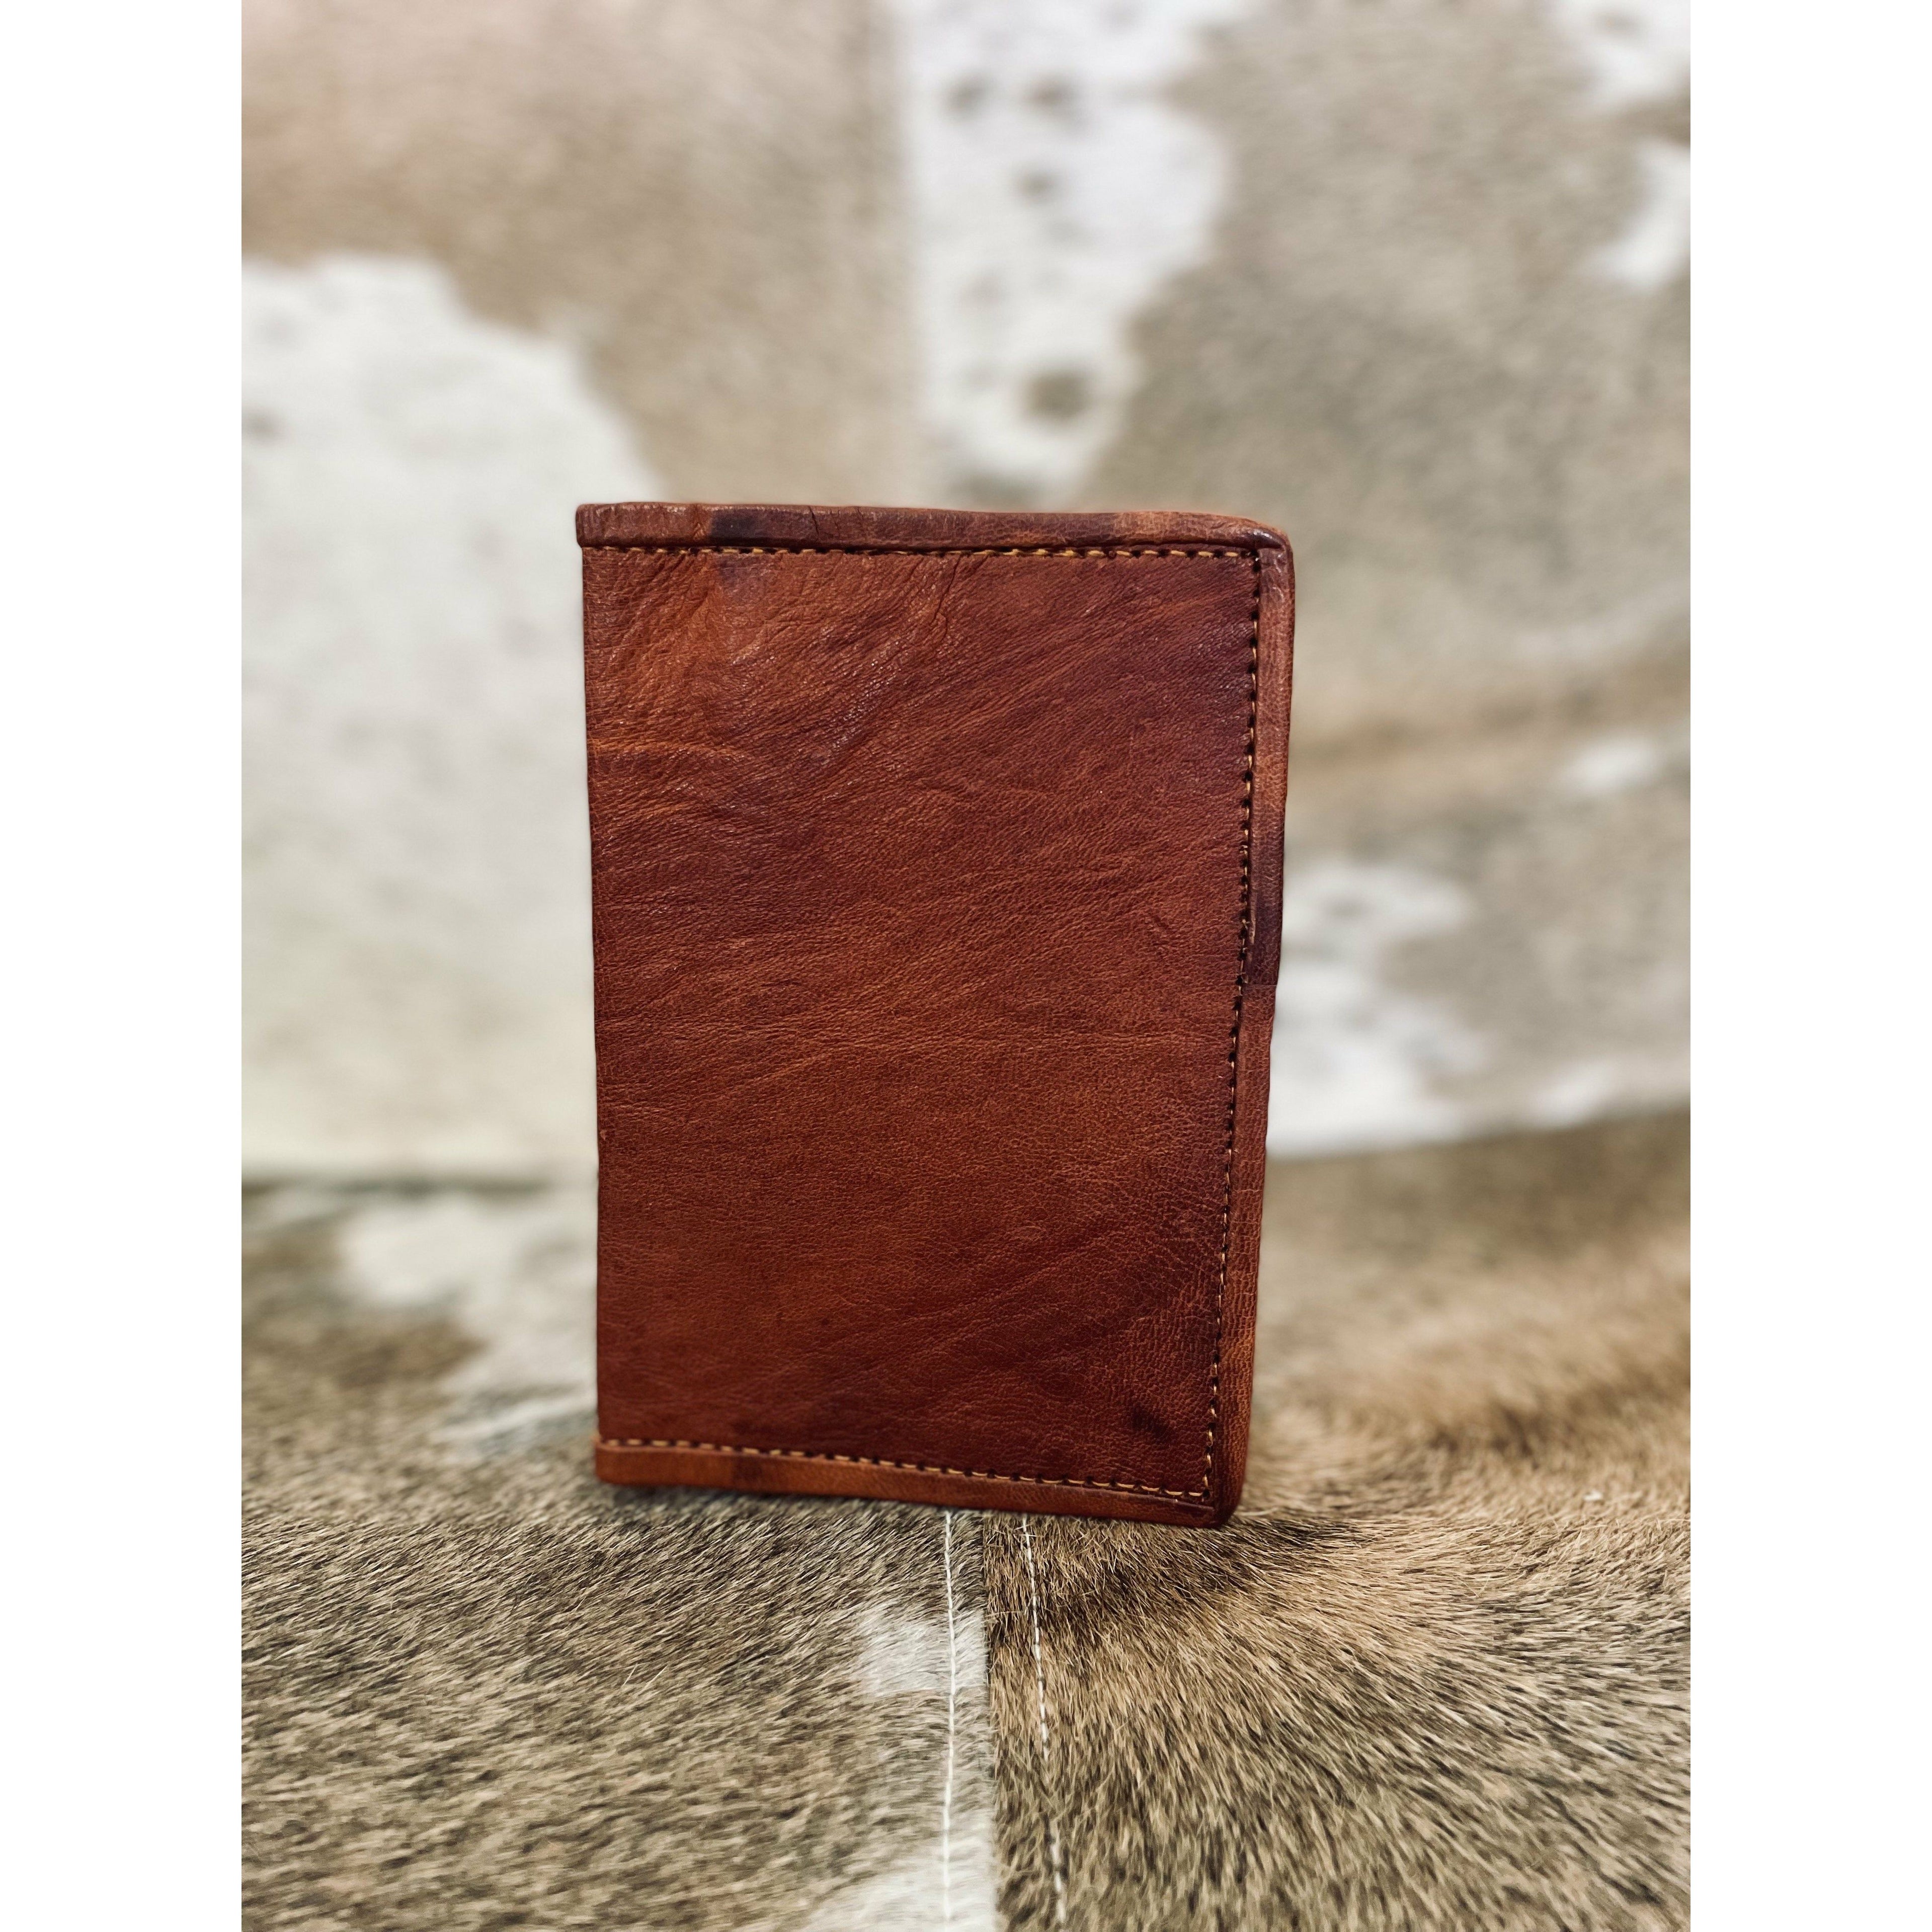 Leather note cover/passport cover